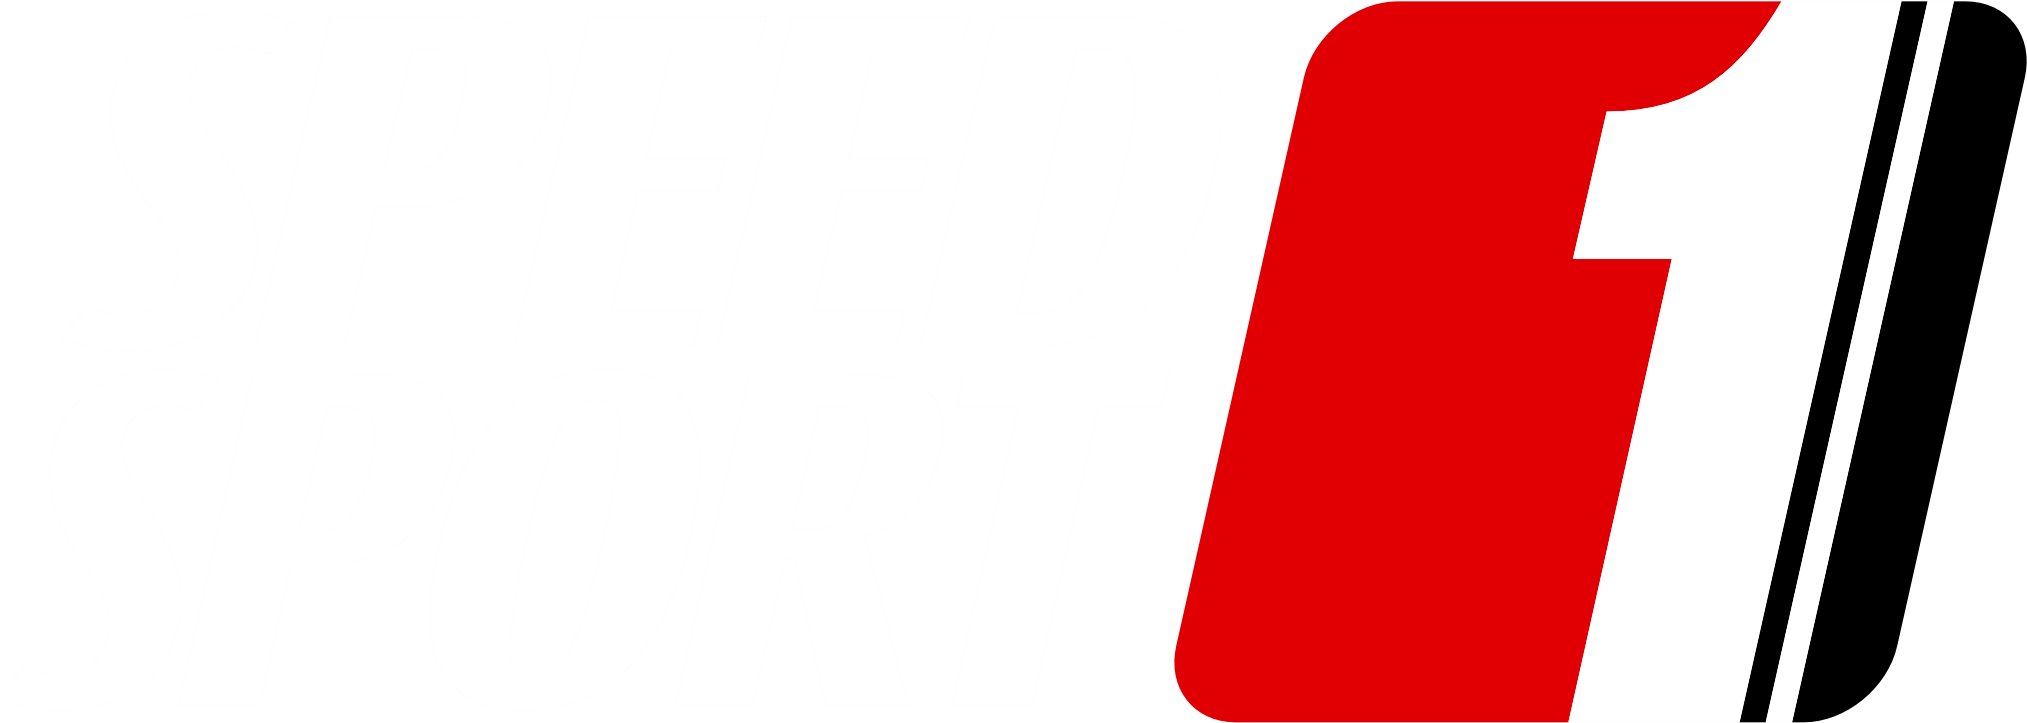 SPEED SPORT, Obsession Media Join to Launch Live Motorsports TV Network